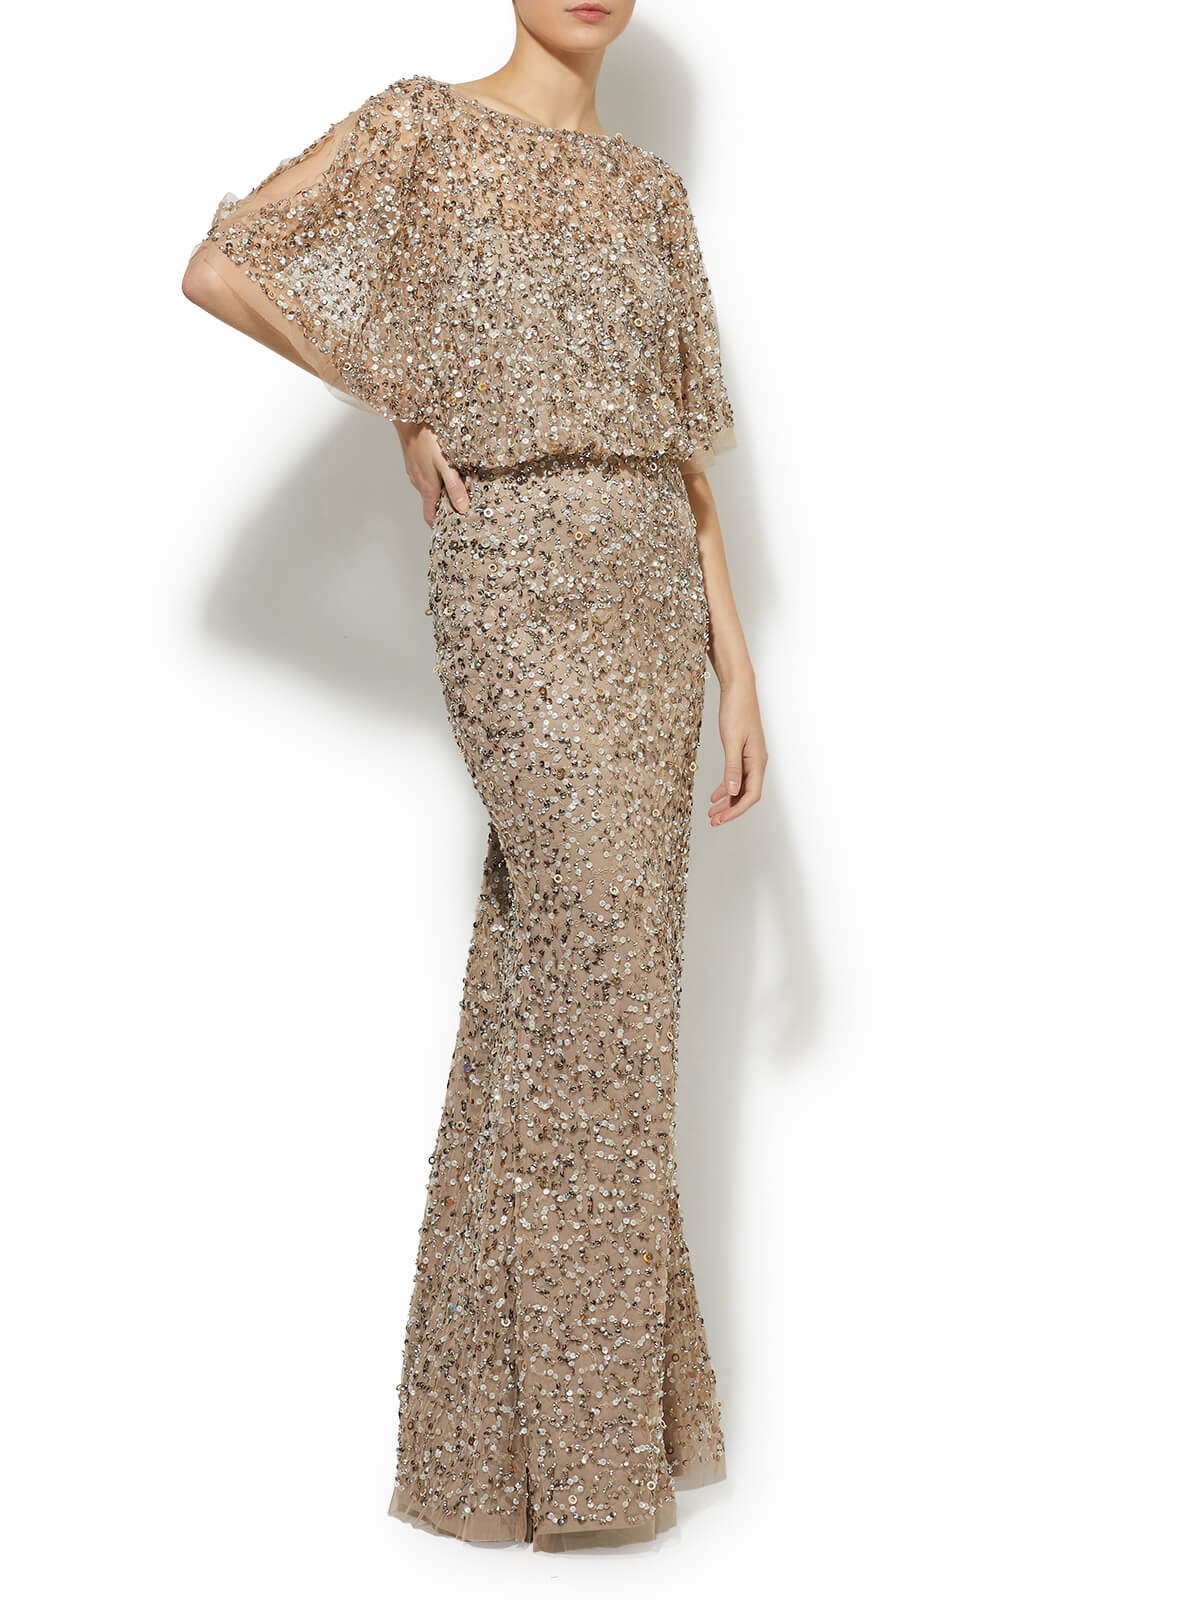 Mimi Hand Beaded Gown by Montique